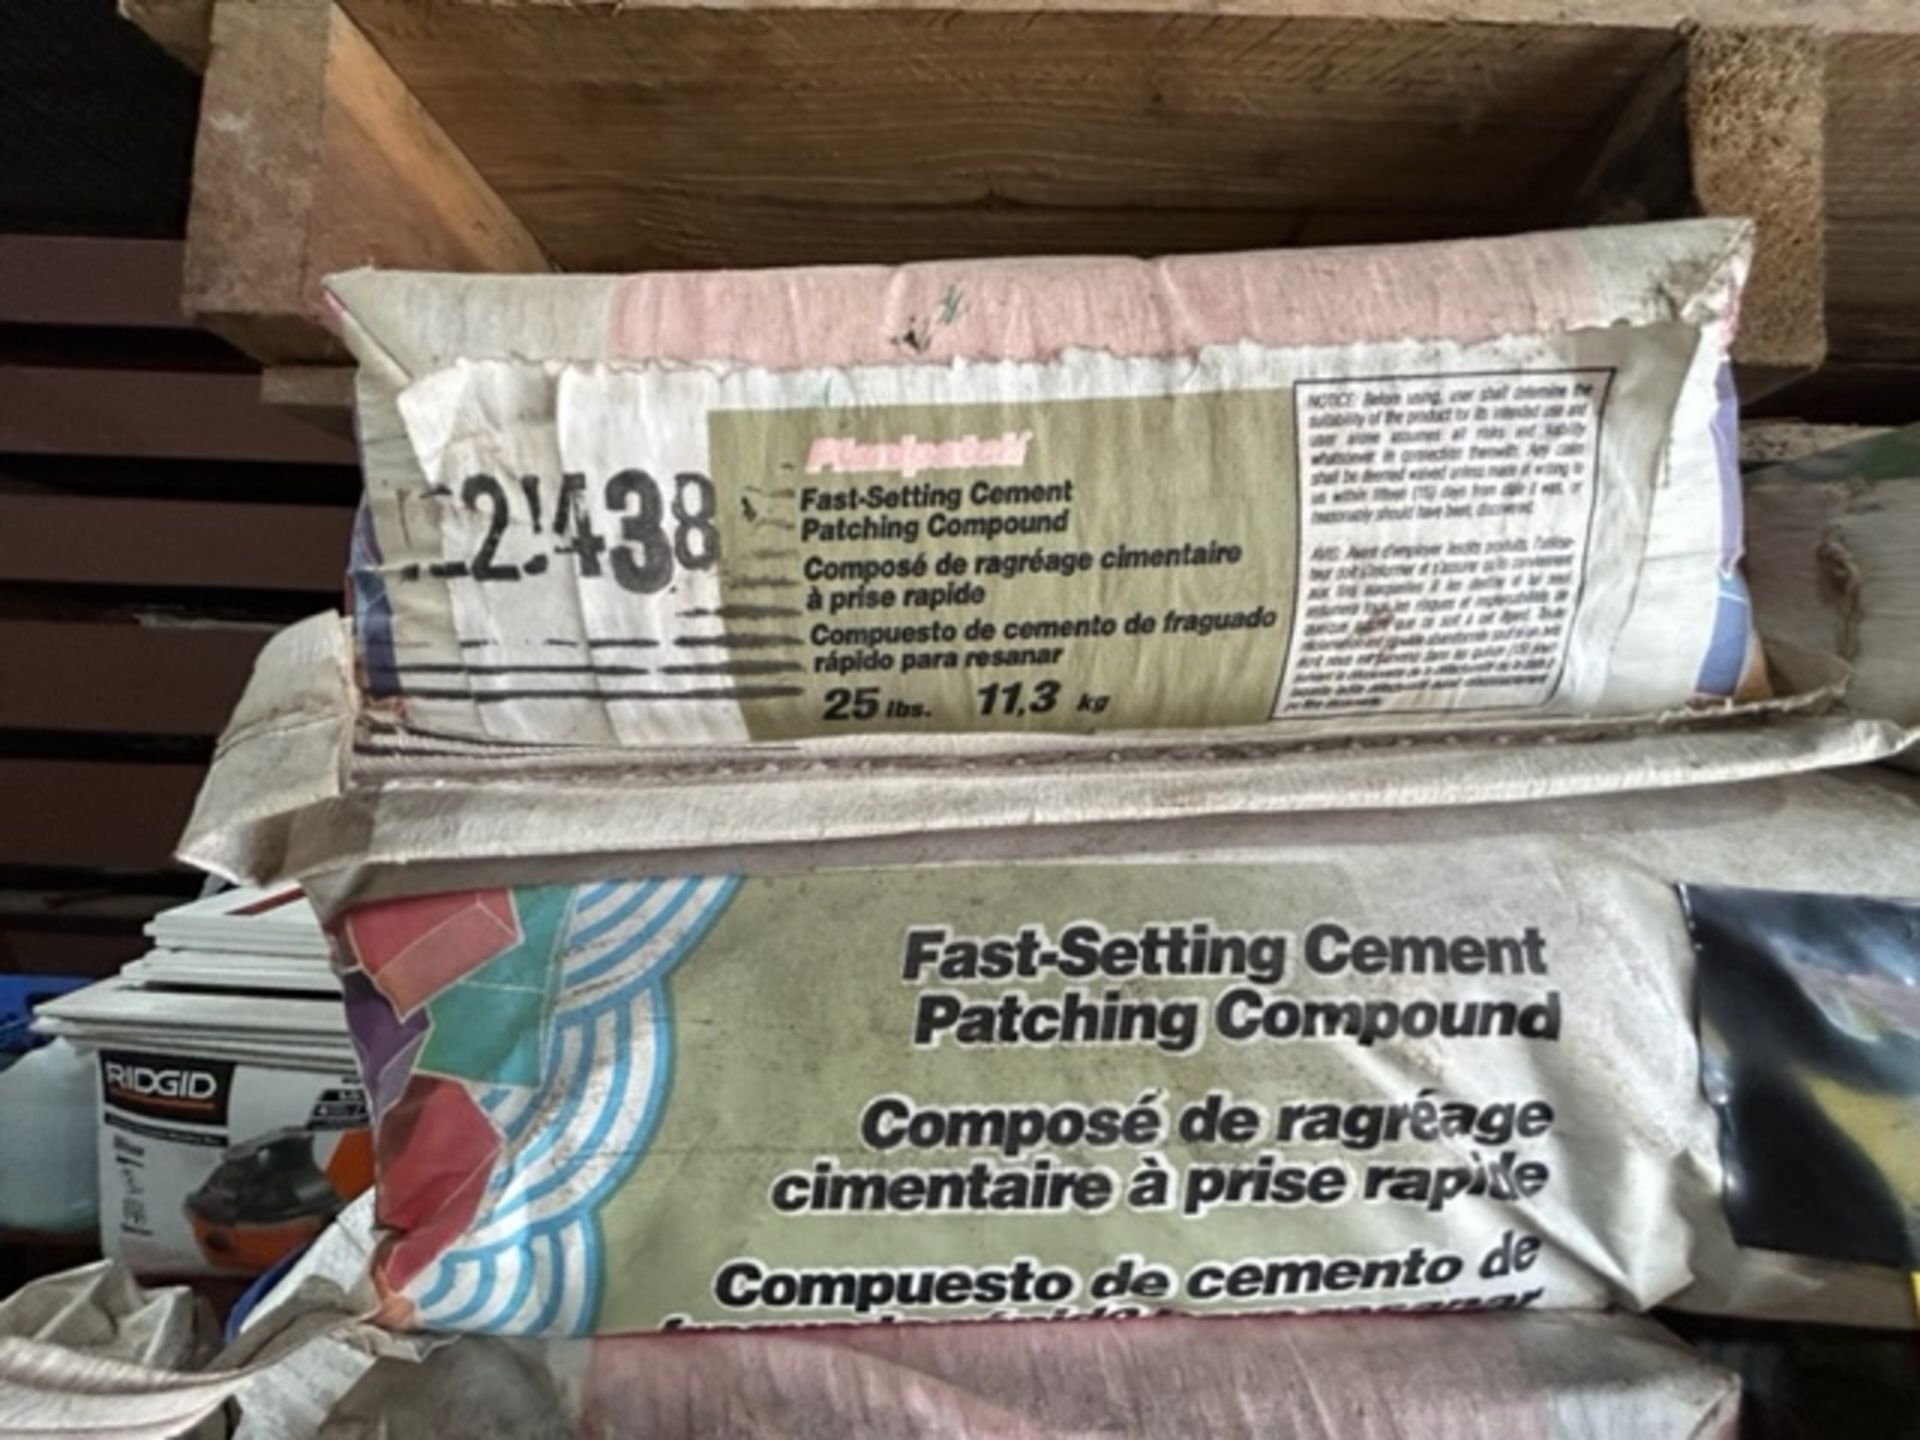 Skid - Fast Setting Cement, 25 Lb. Bags, Approx 65 Bags - Image 2 of 2